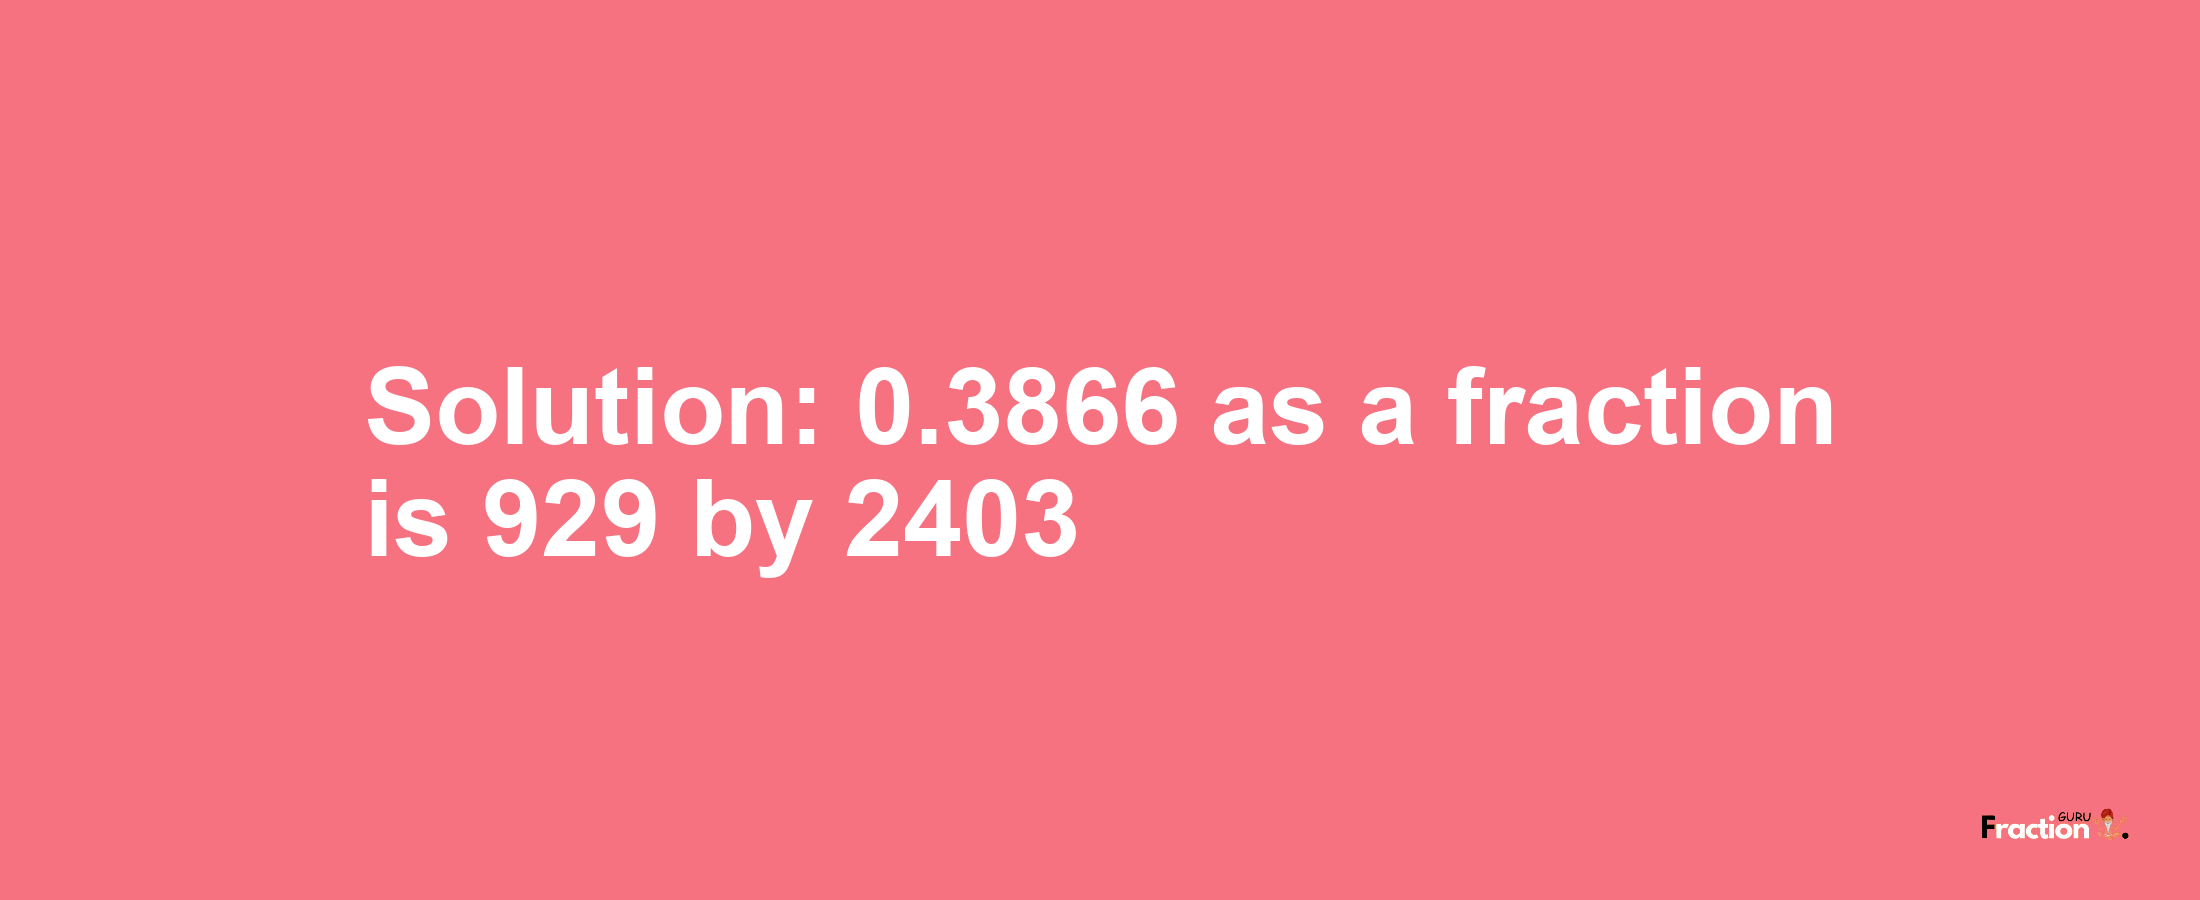 Solution:0.3866 as a fraction is 929/2403